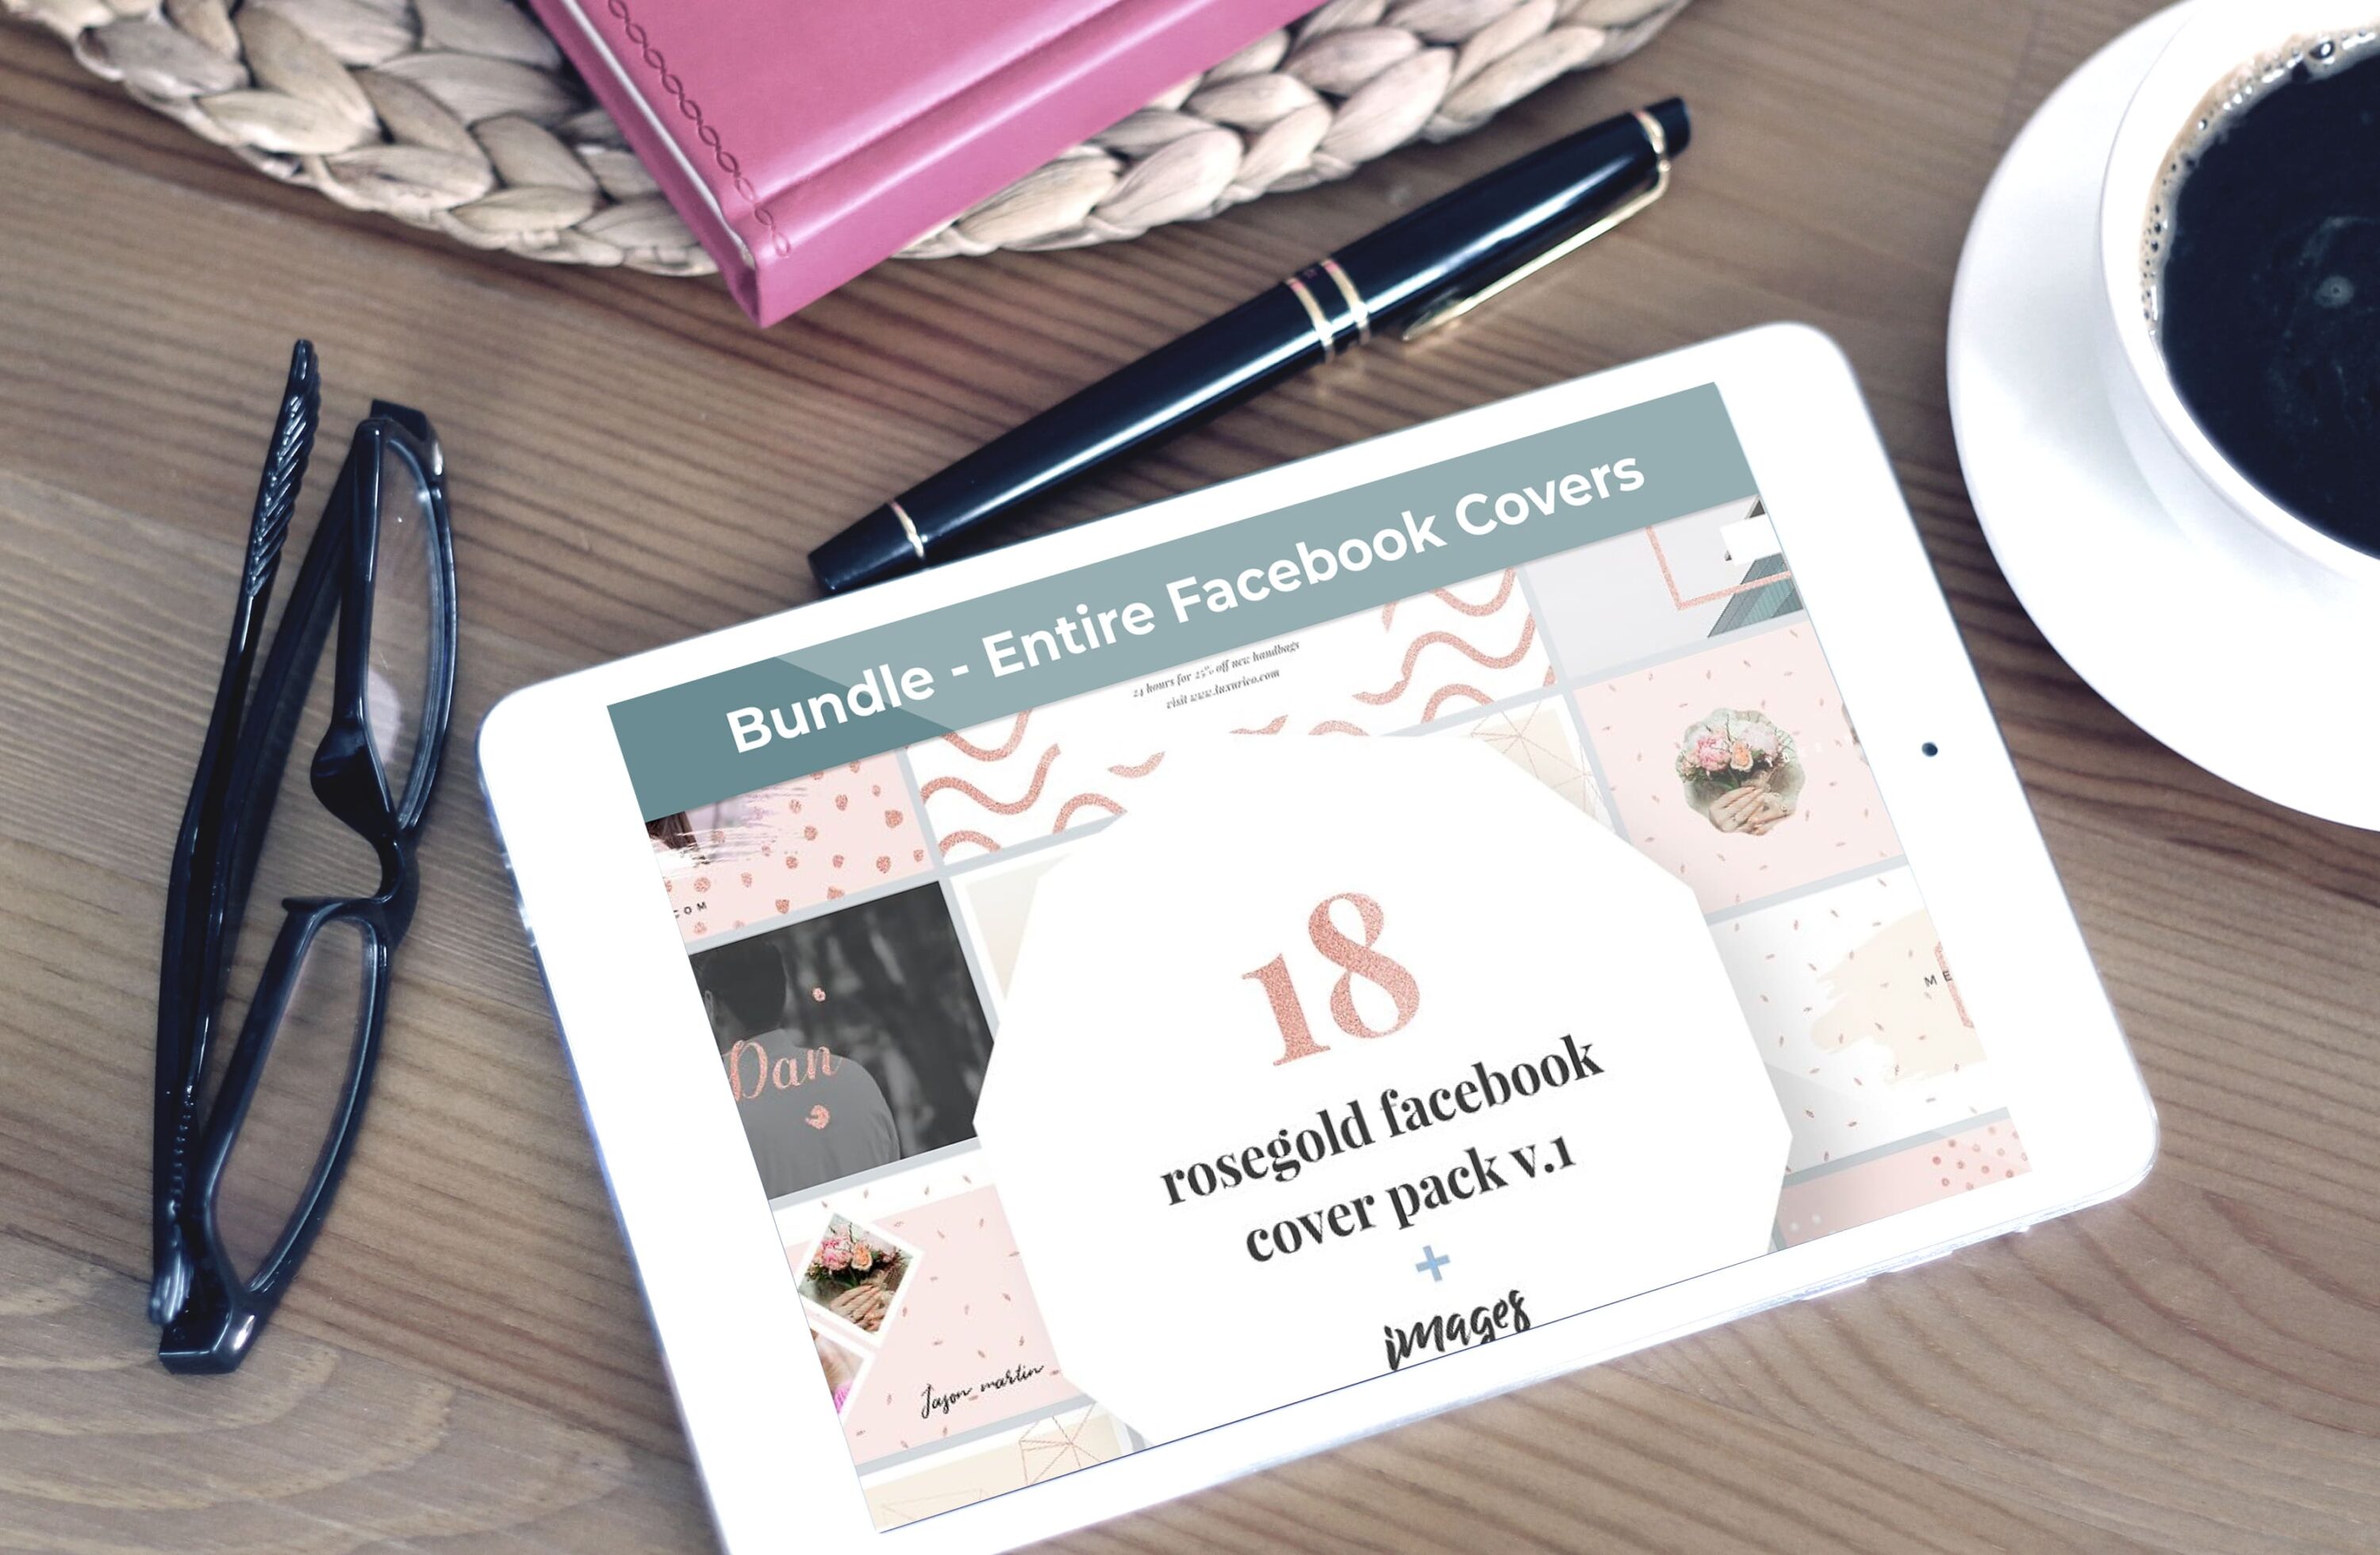 Tablet option of the Bundle - Entire Facebook Covers.